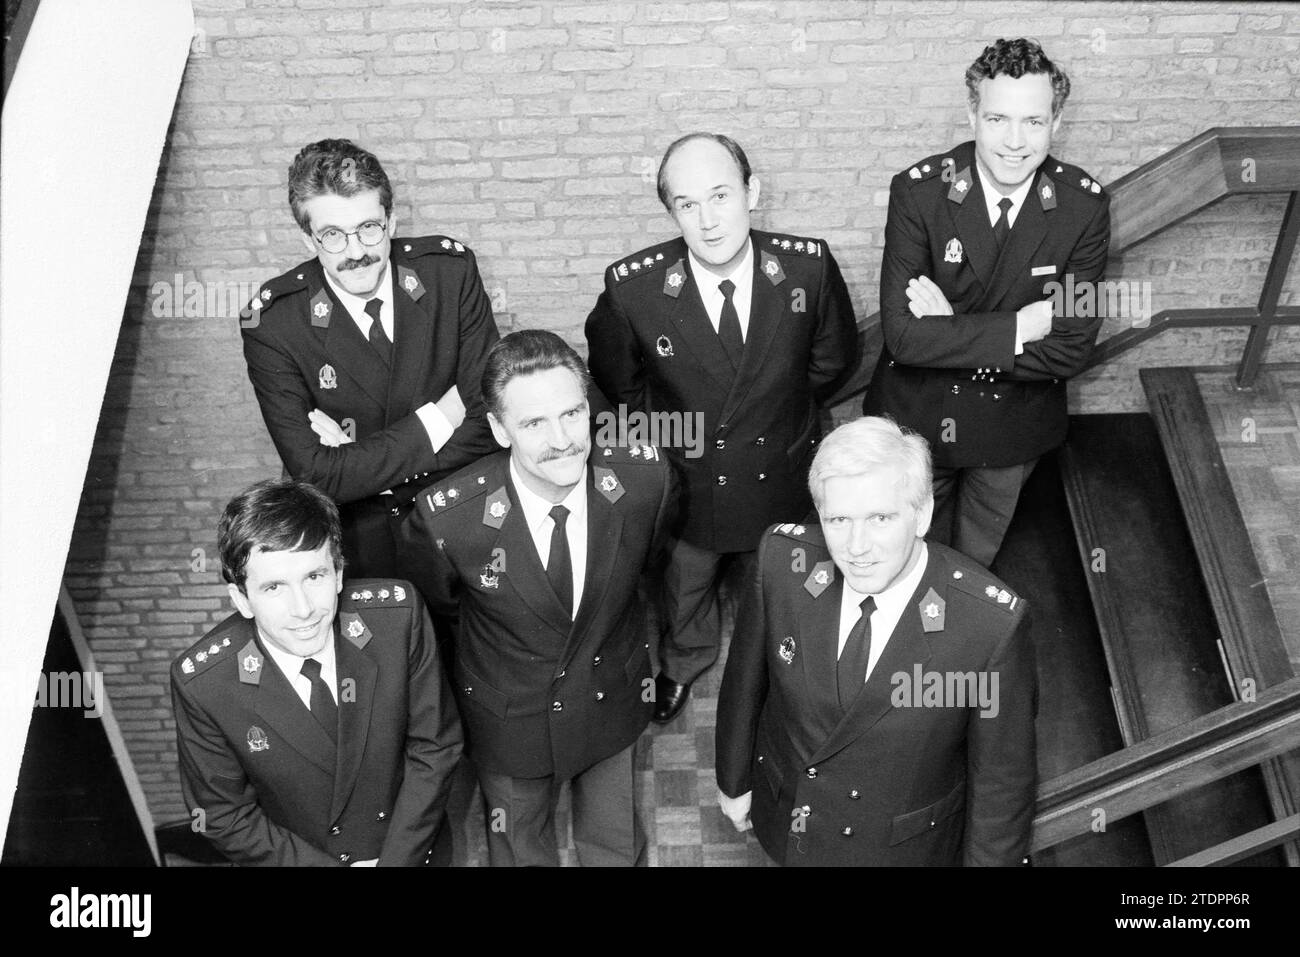 Police: group of new regional commissioners, 21-01-1992, Whizgle News from the Past, Tailored for the Future. Explore historical narratives, Dutch The Netherlands agency image with a modern perspective, bridging the gap between yesterday's events and tomorrow's insights. A timeless journey shaping the stories that shape our future Stock Photo